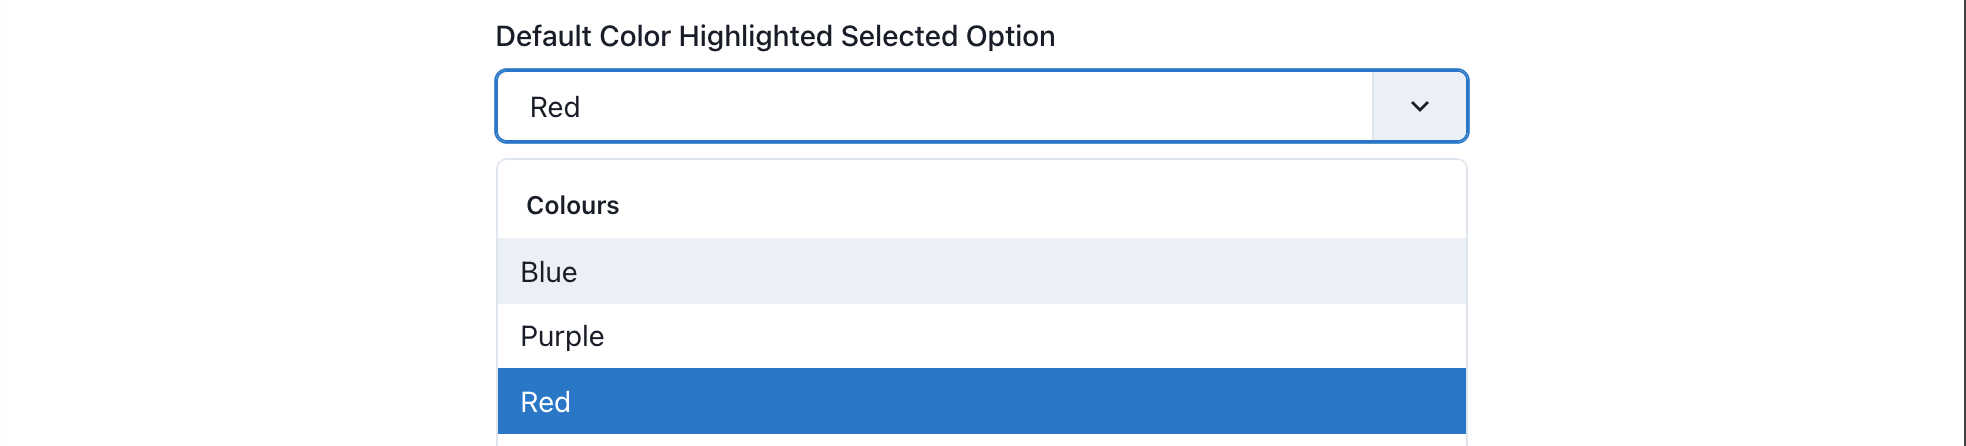 color-selected-option.png